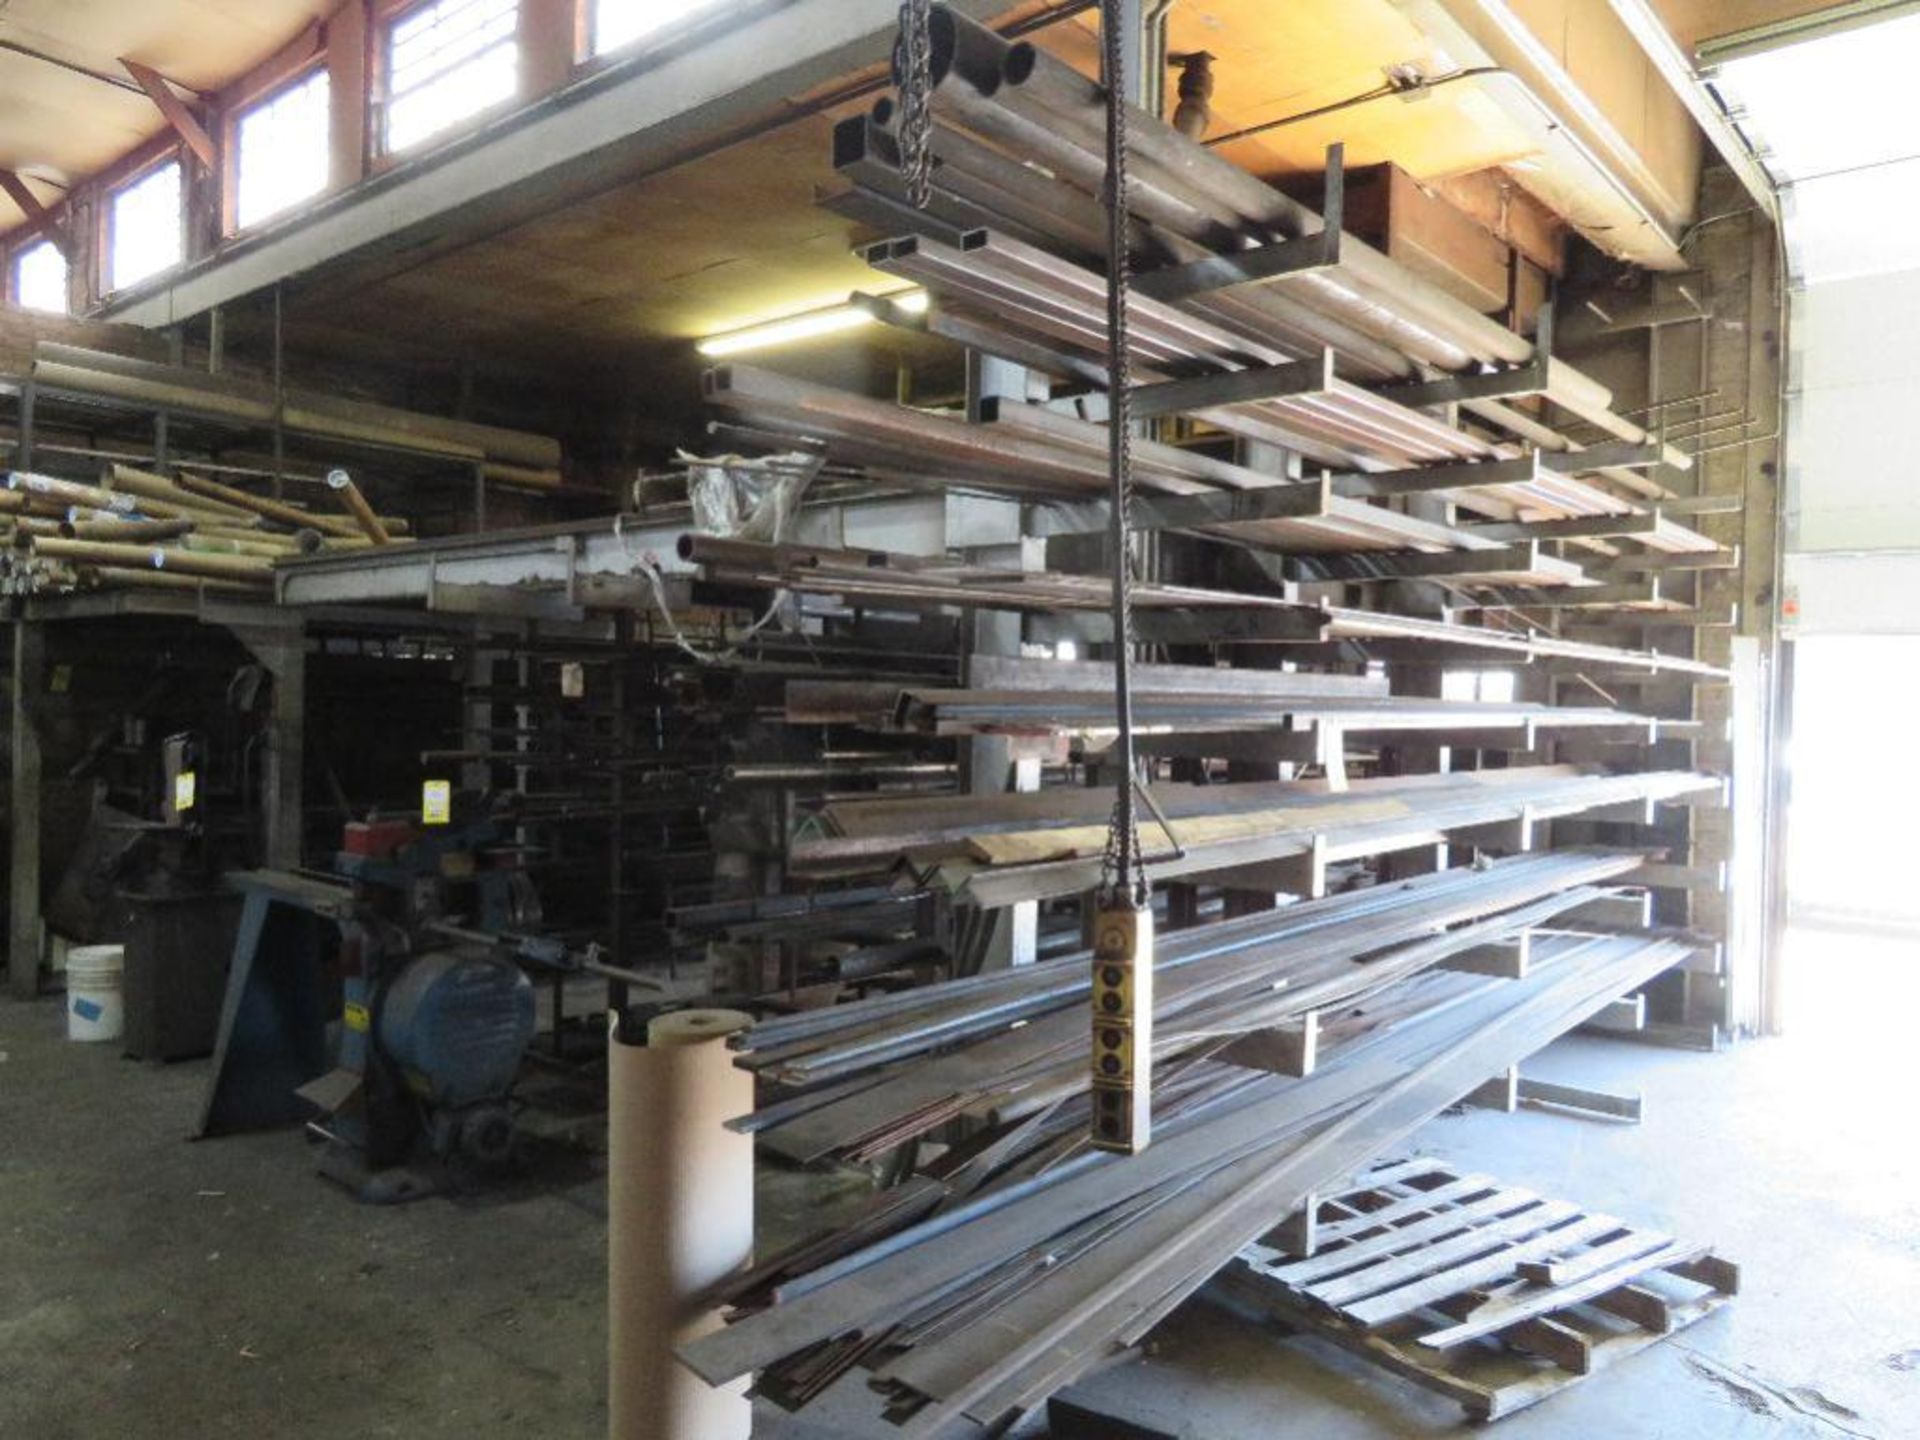 LOT: Contents of Rack ? Large Quantity Steel including Angle-Round-Flat Bar & Pipe & Threaded Rod